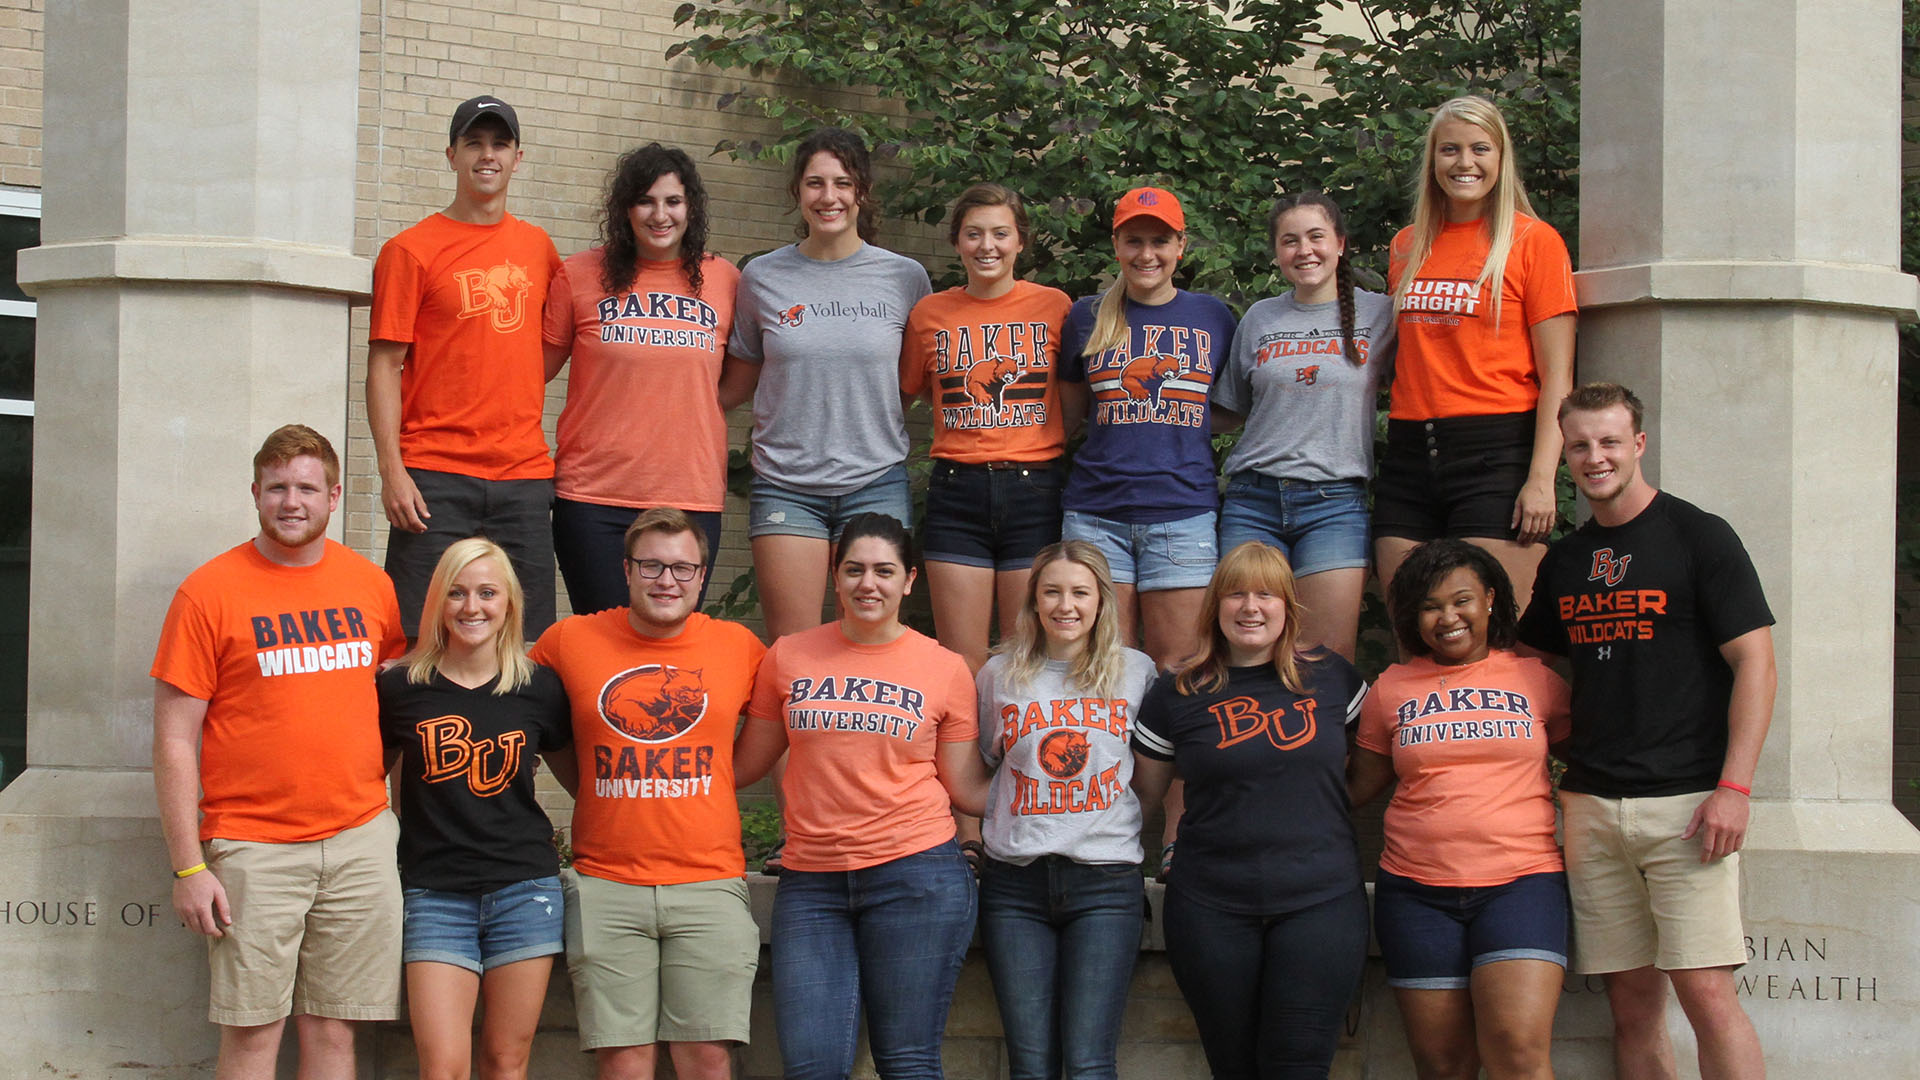 Group photo of student UAA's standing between two columns and wearing baker university shirts